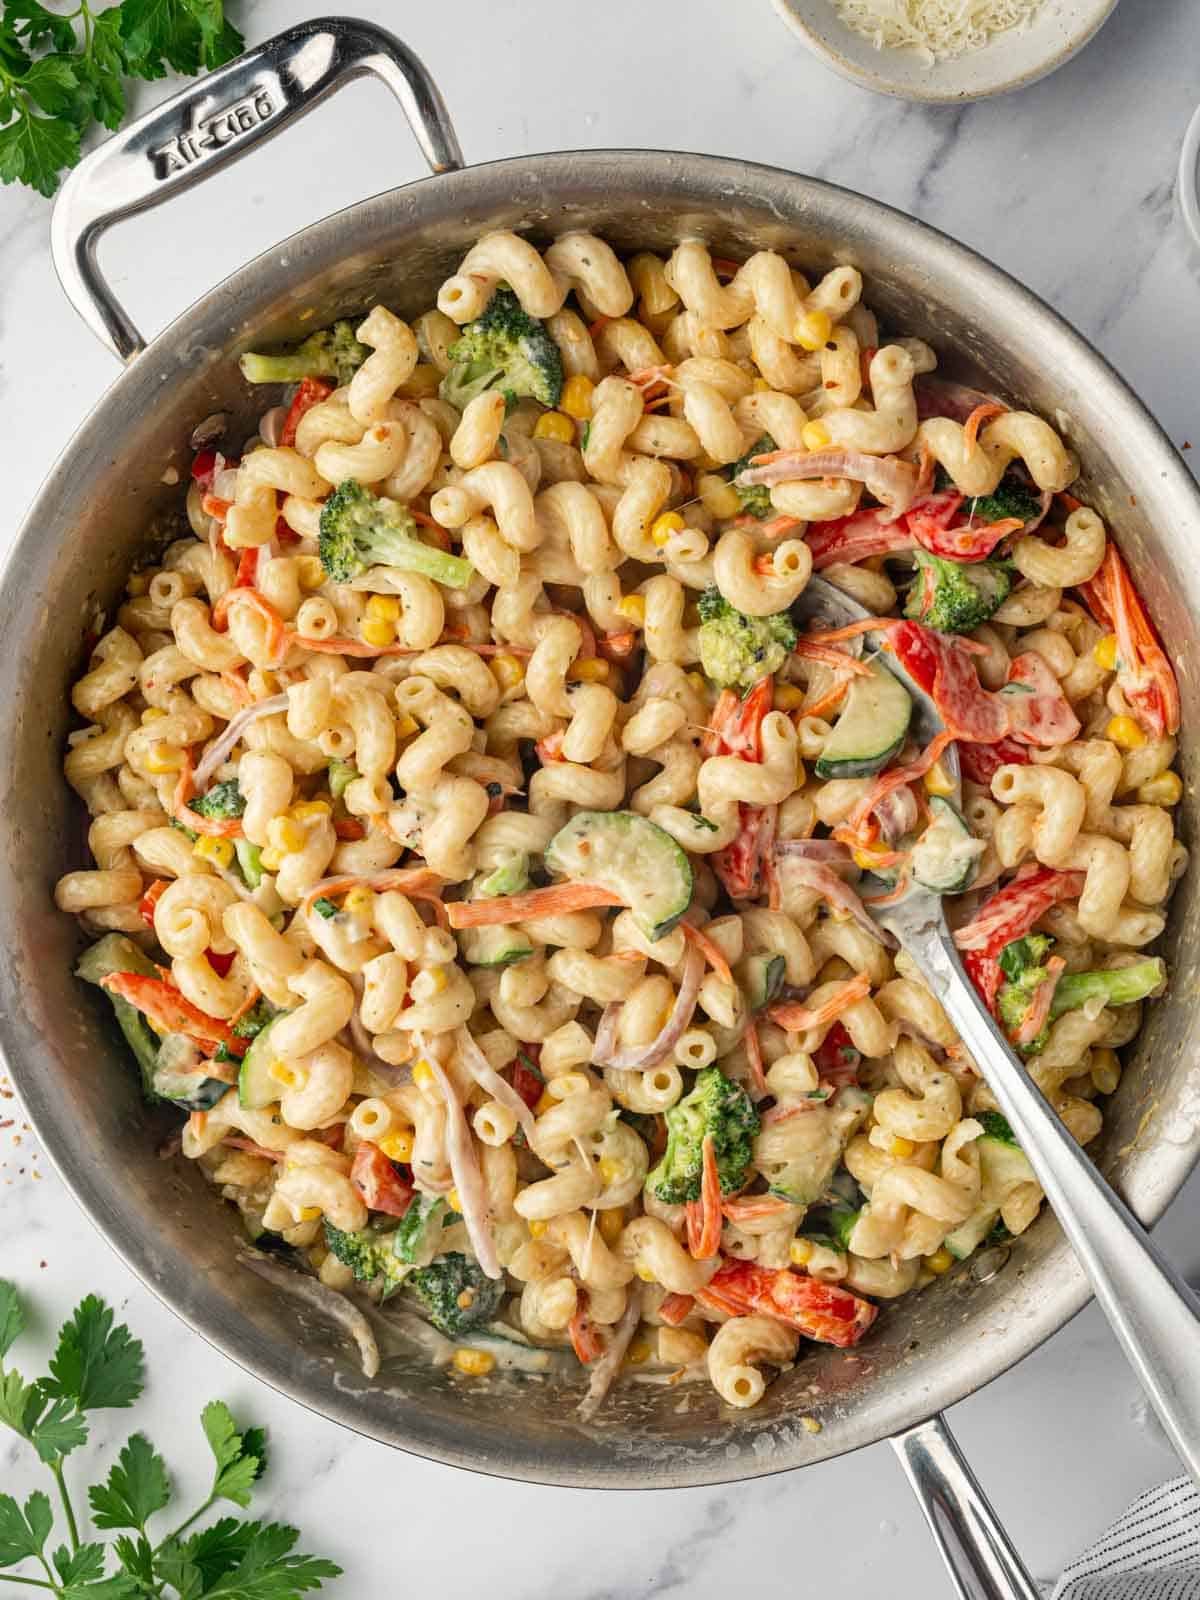 A spoon serves cheesy pasta with vegetable from a skillet.